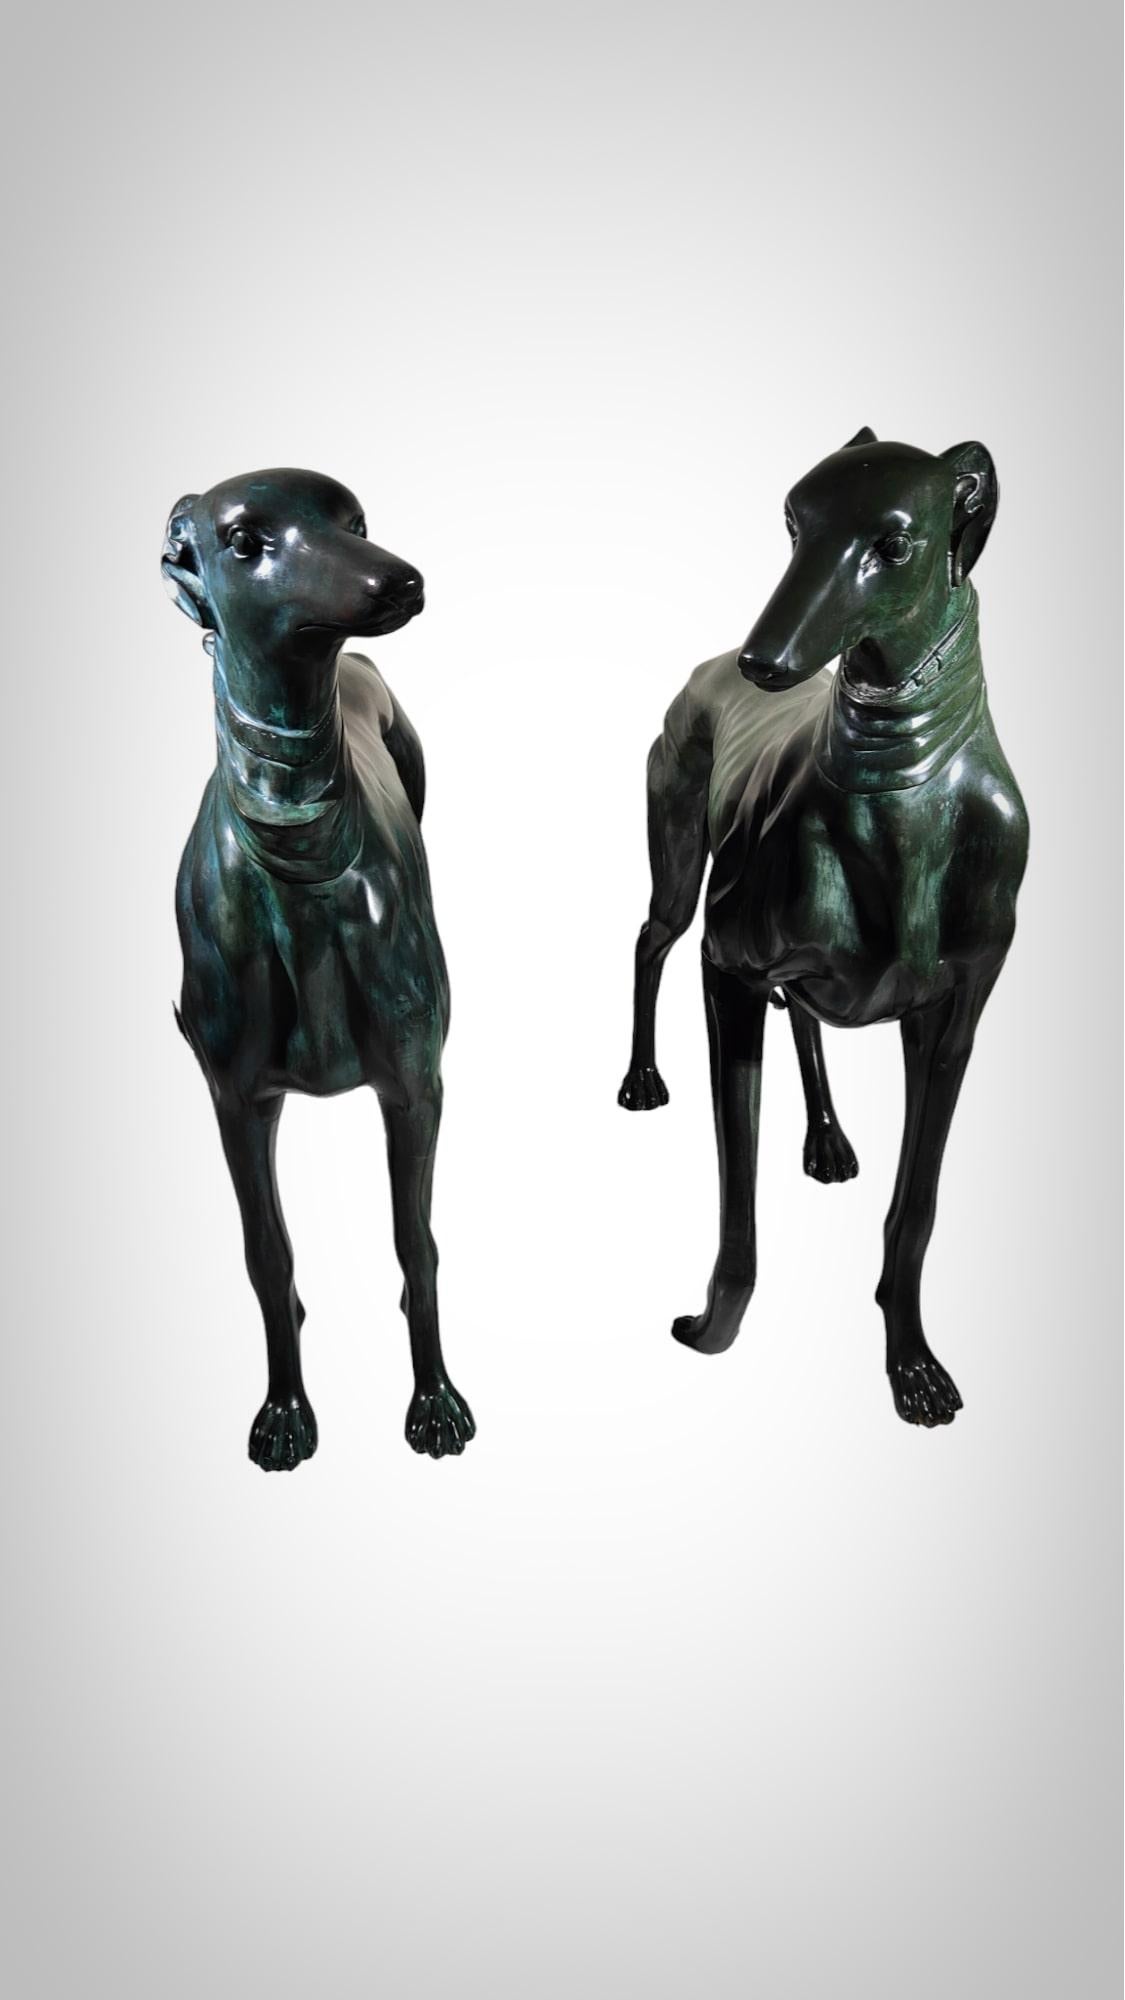 Pair of life-size bronze greyhound dogs
Great pair of bronze greyhound dogs with green patina. 40's. Excellent condition. Very decorative.